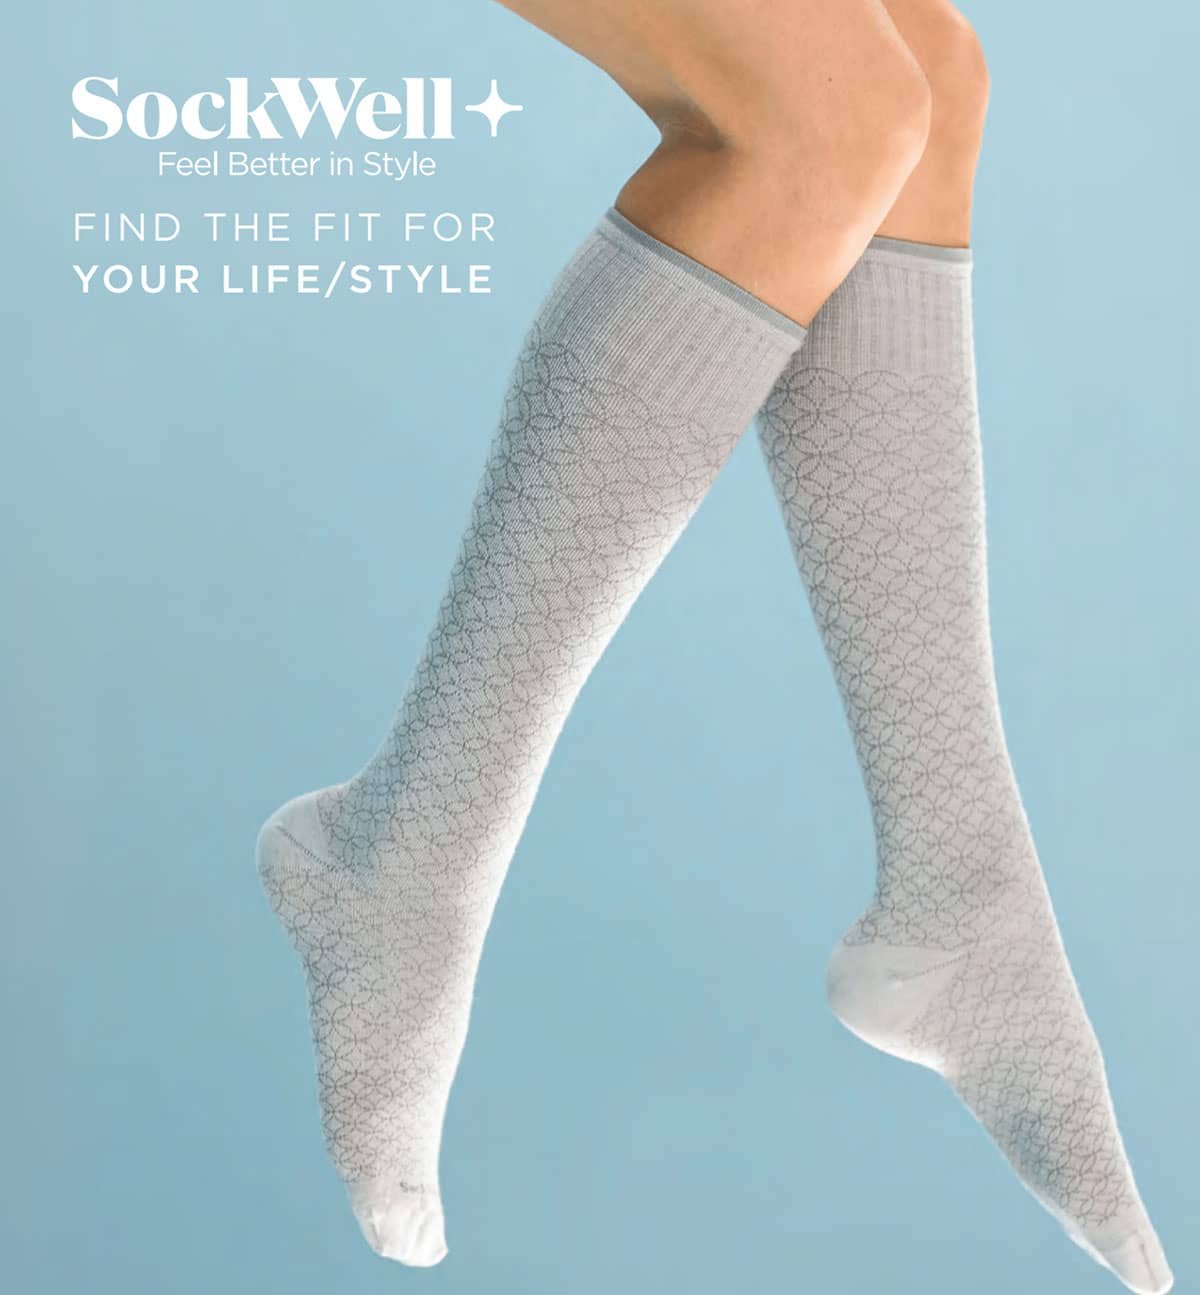 ameswalker.com: Spice up your look with Sockwell compression socks!